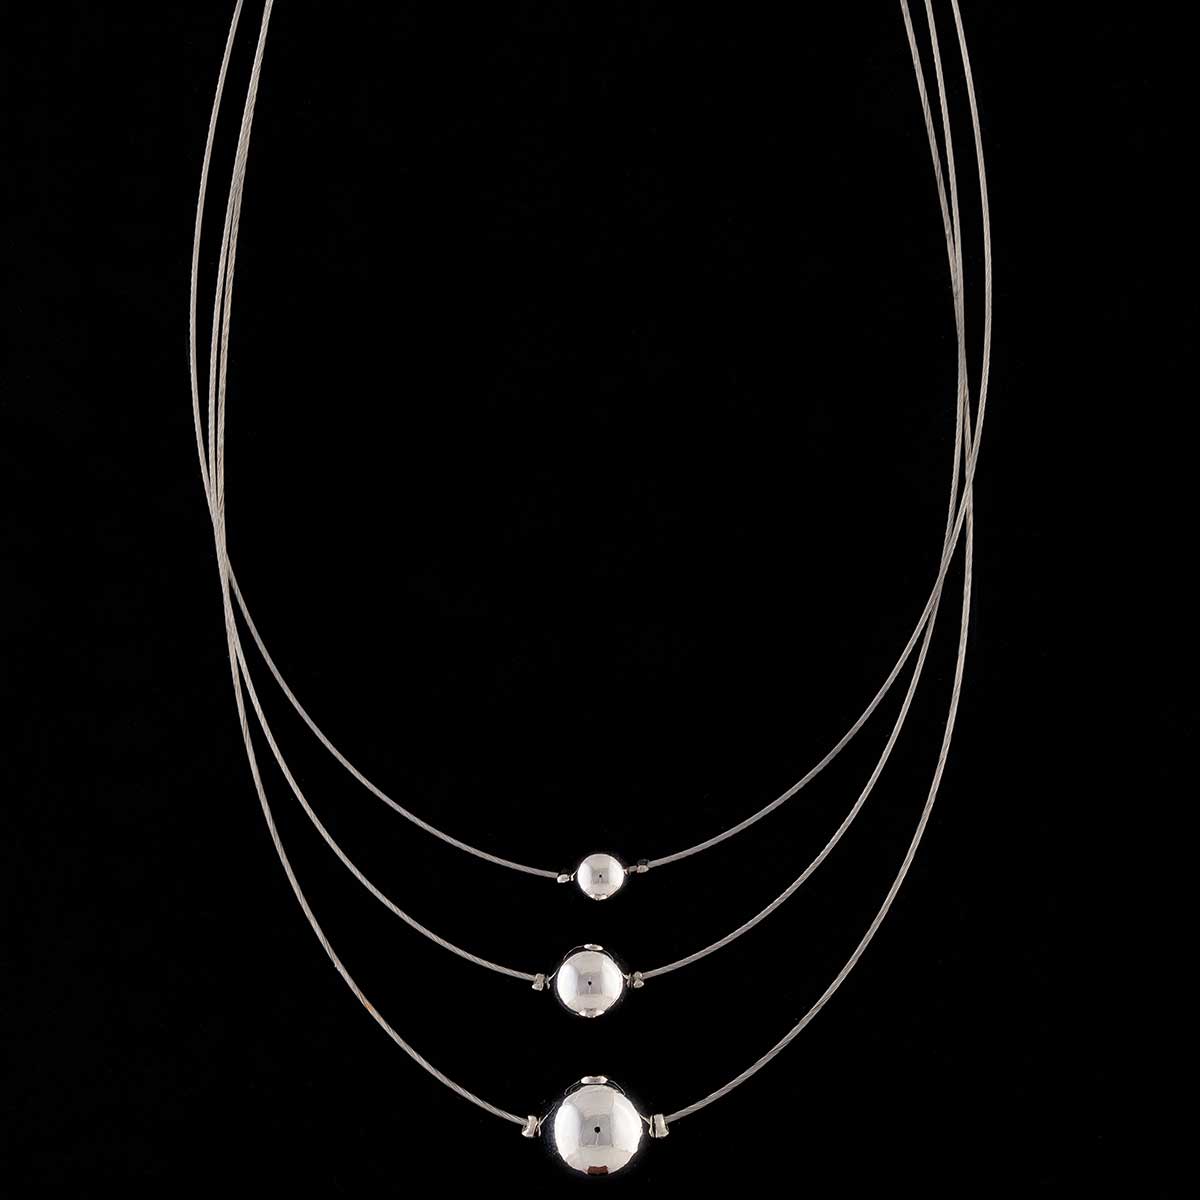 Silver Triple Strand with Beads Necklace on Chain